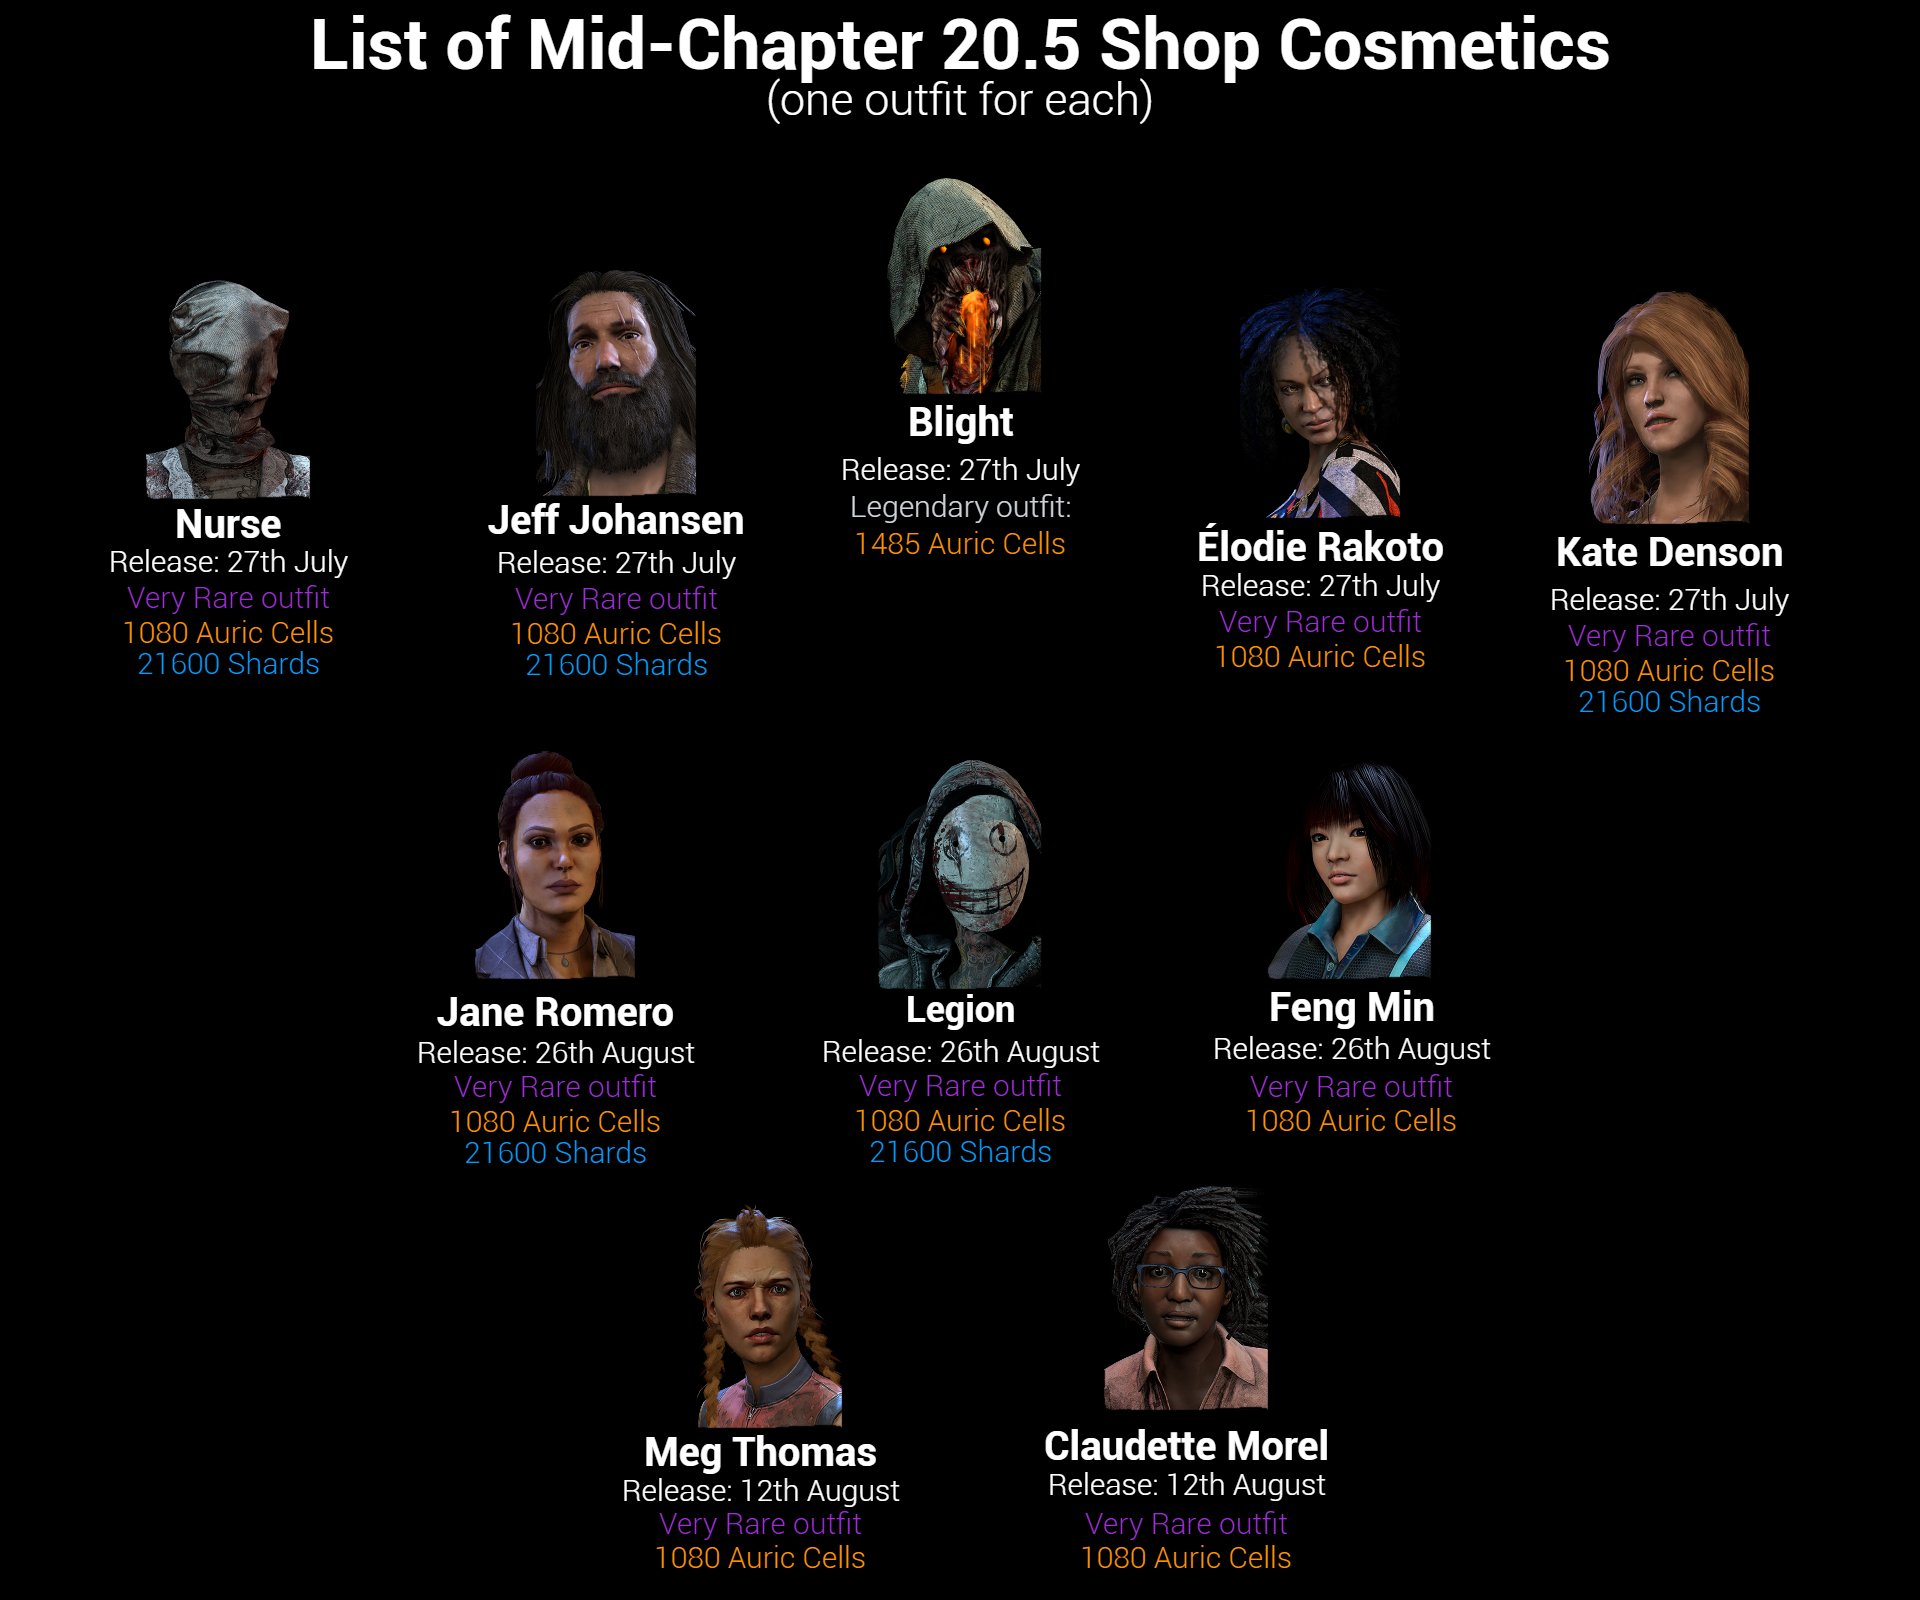 Dbdleaks Shop Cosmetics For Mid Chapter 5 Ptb For Mid Chapter Is Scheduled For 6th July Live Release Is Scheduled For 27th July Leaksdbd Dbdleaks Dbd Deadbydaylight T Co Qktvliucdp Twitter